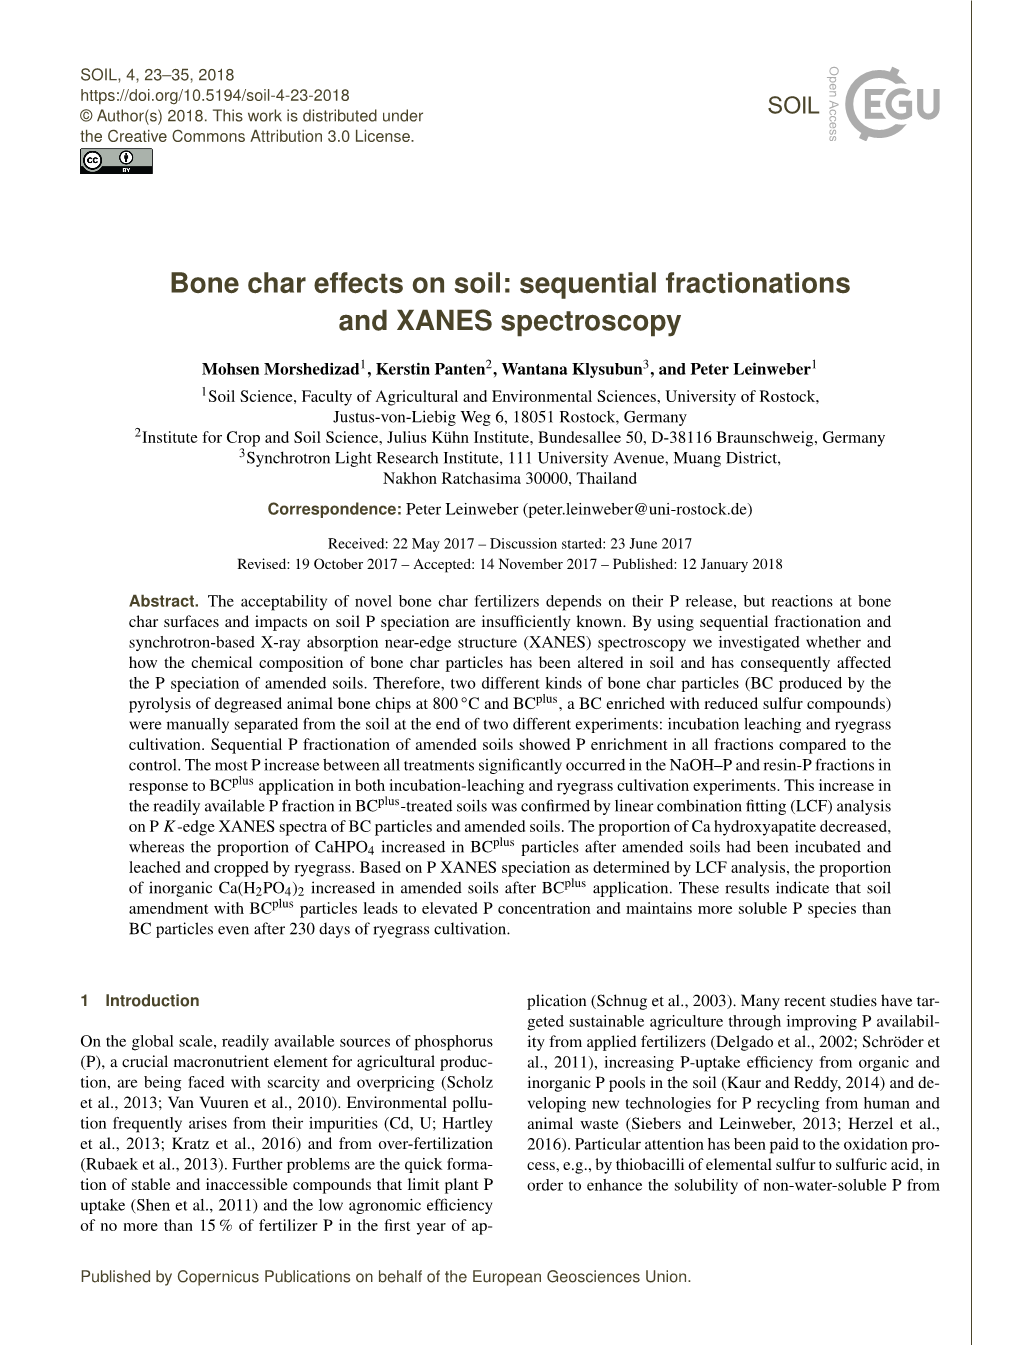 Bone Char Effects on Soil: Sequential Fractionations and XANES Spectroscopy